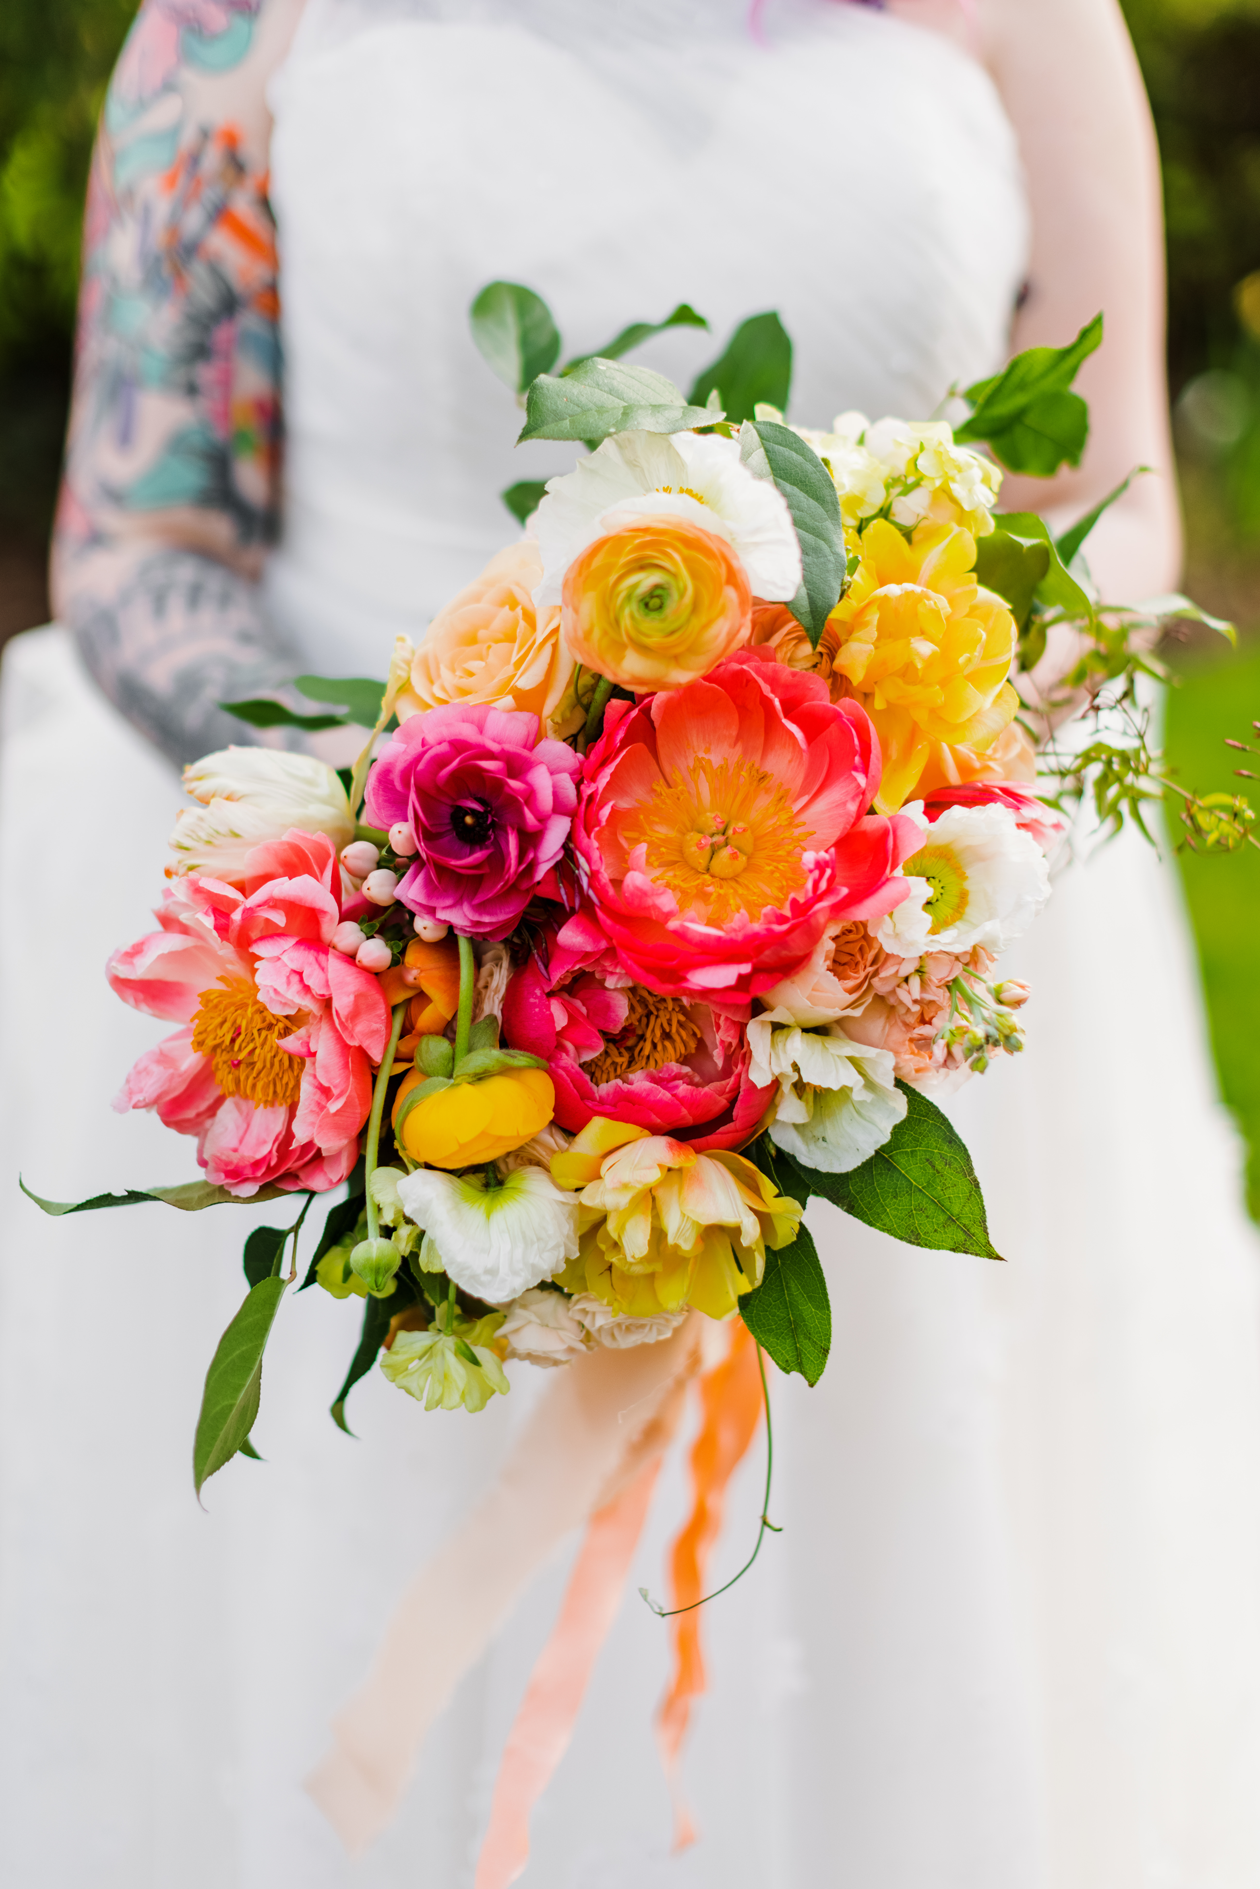 The Crafted Life's Colorful Wedding